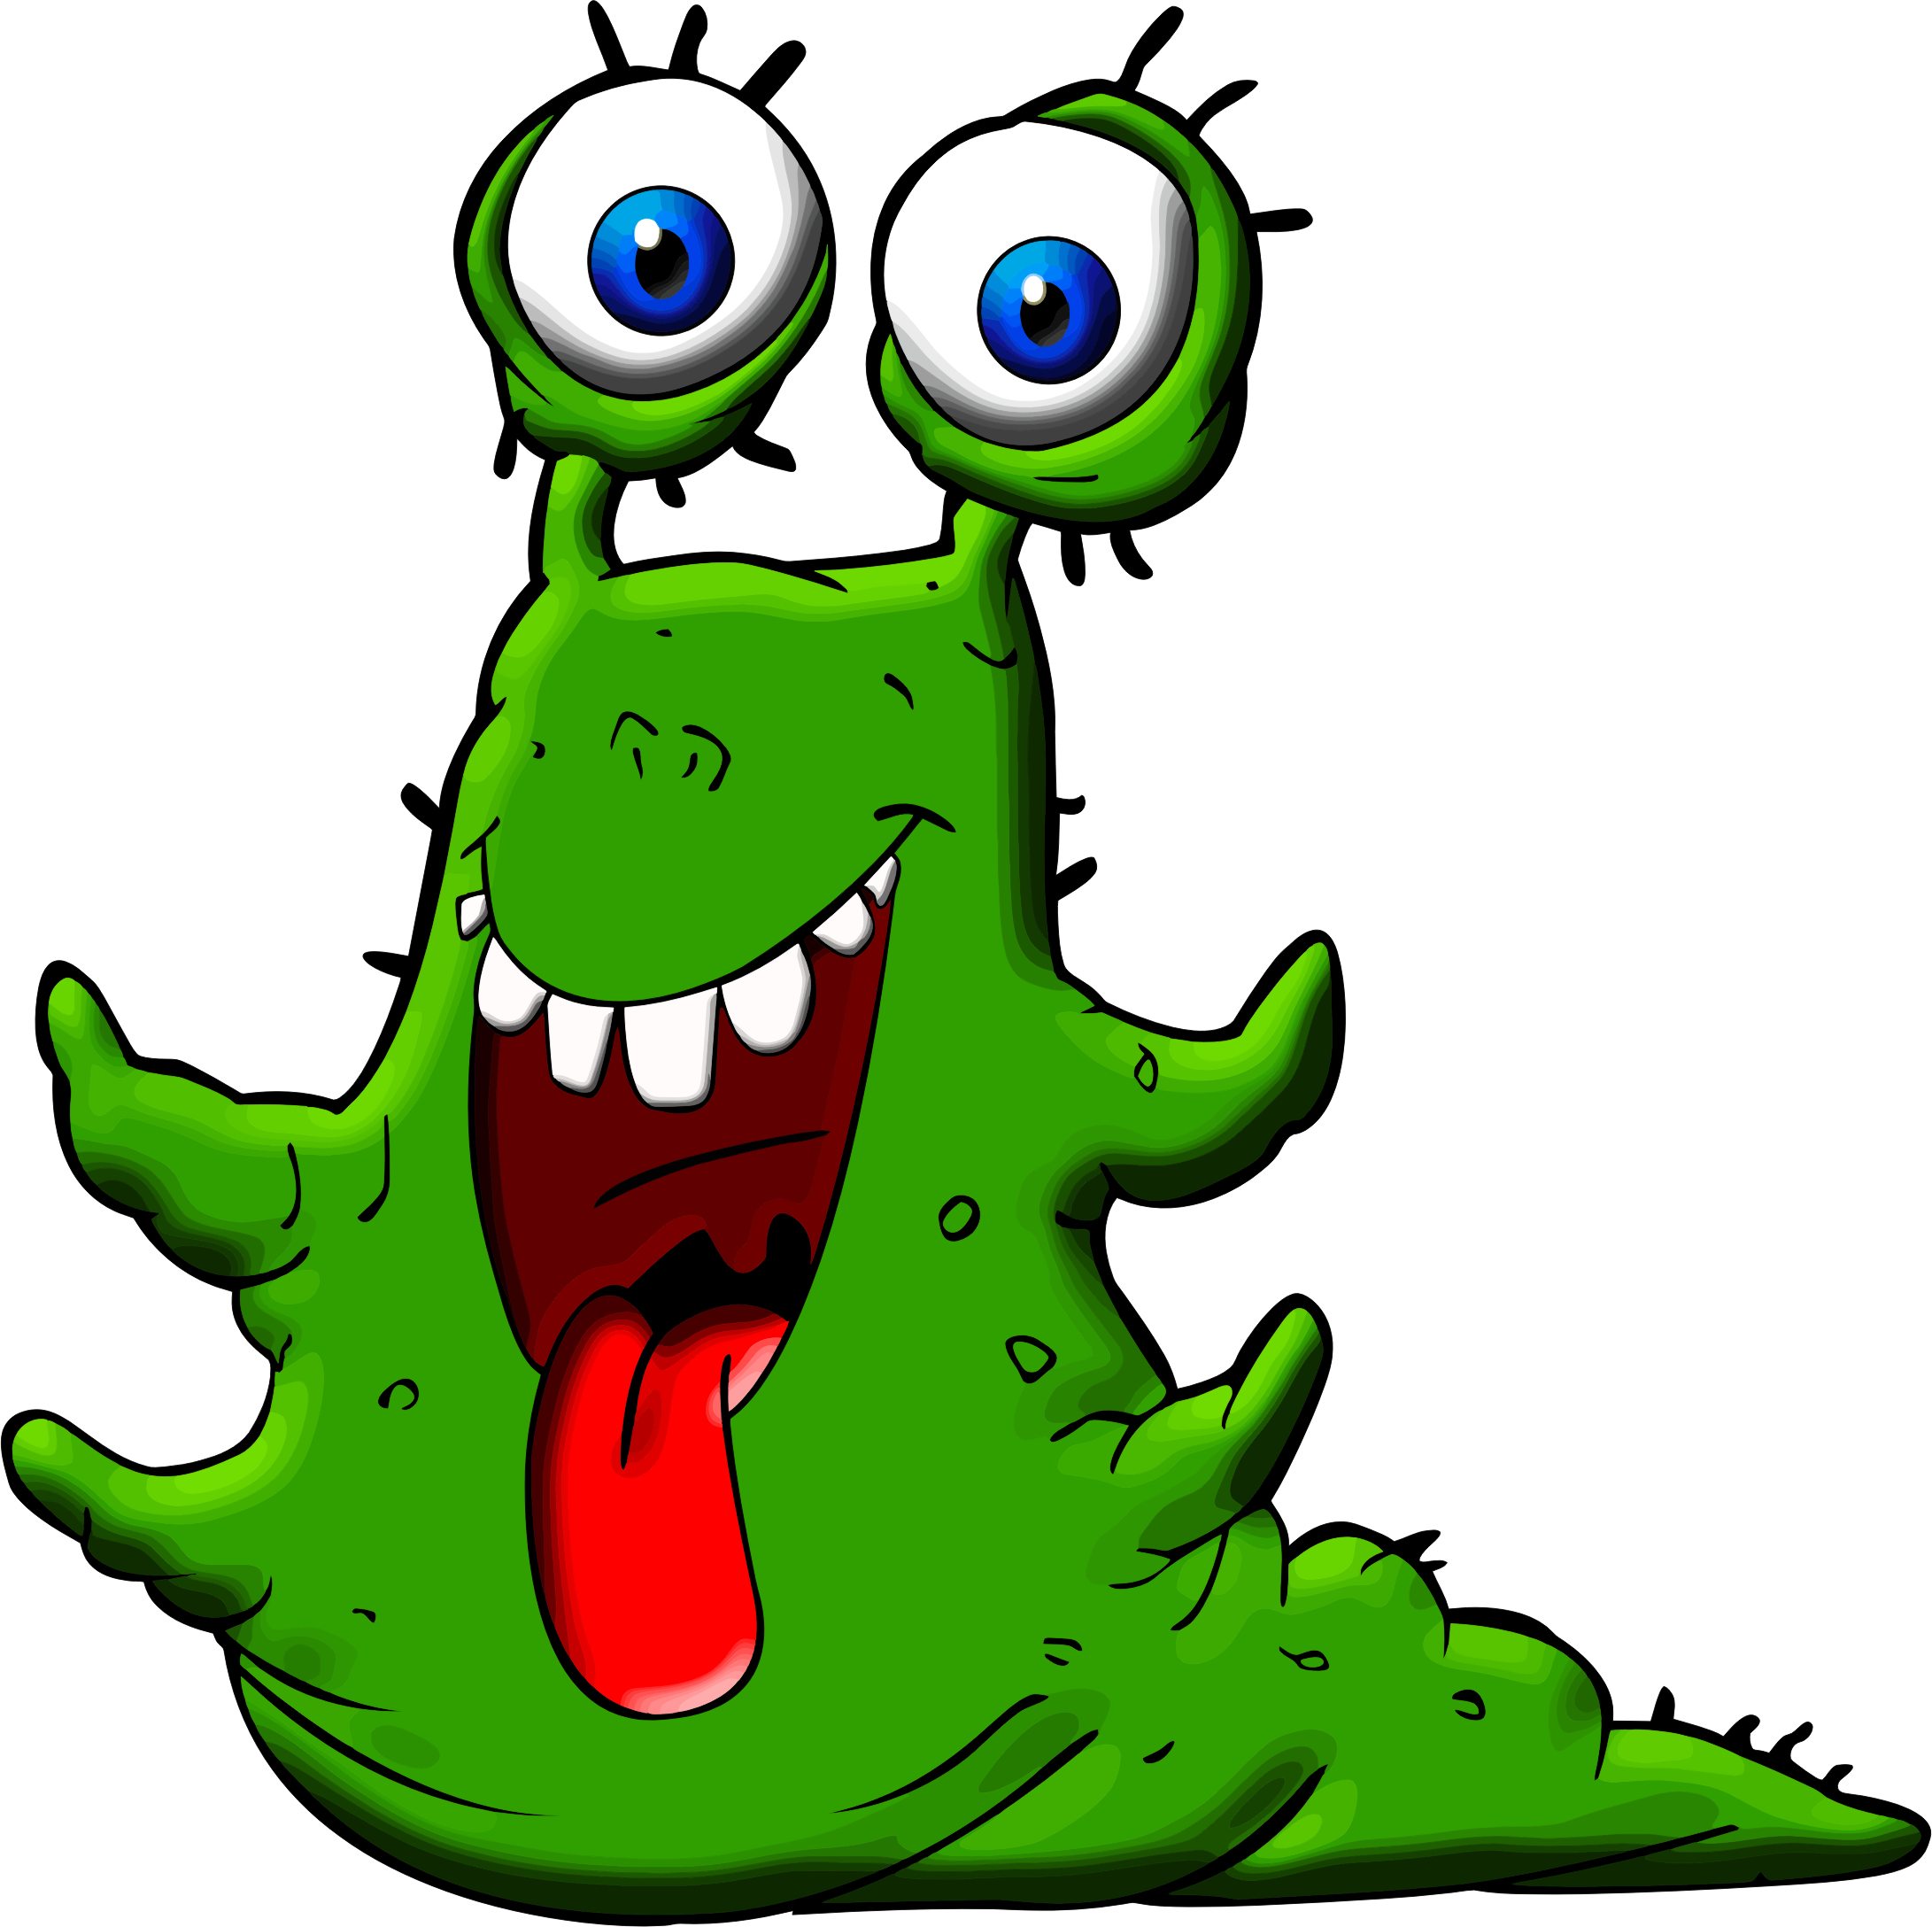 Foot clipart monster. Image result for monsters